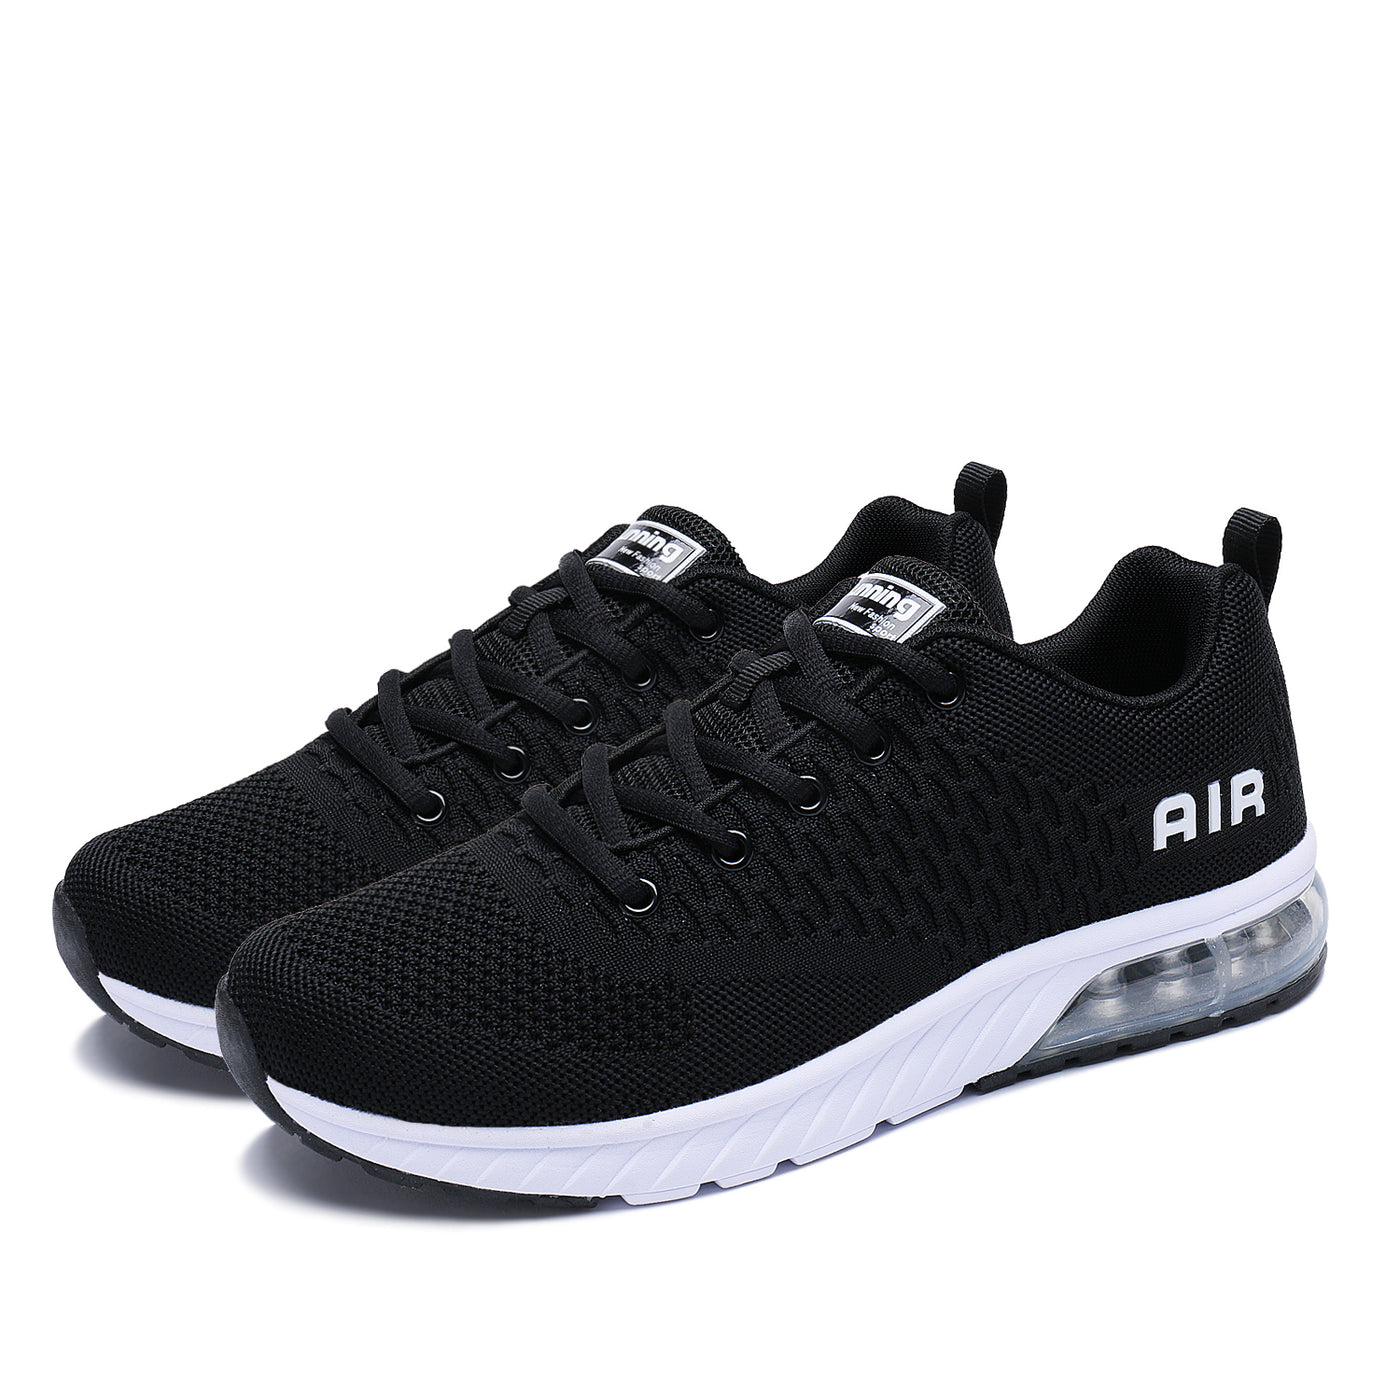 Men's Stretch Knit Sneakers Breathable Sports Tennis